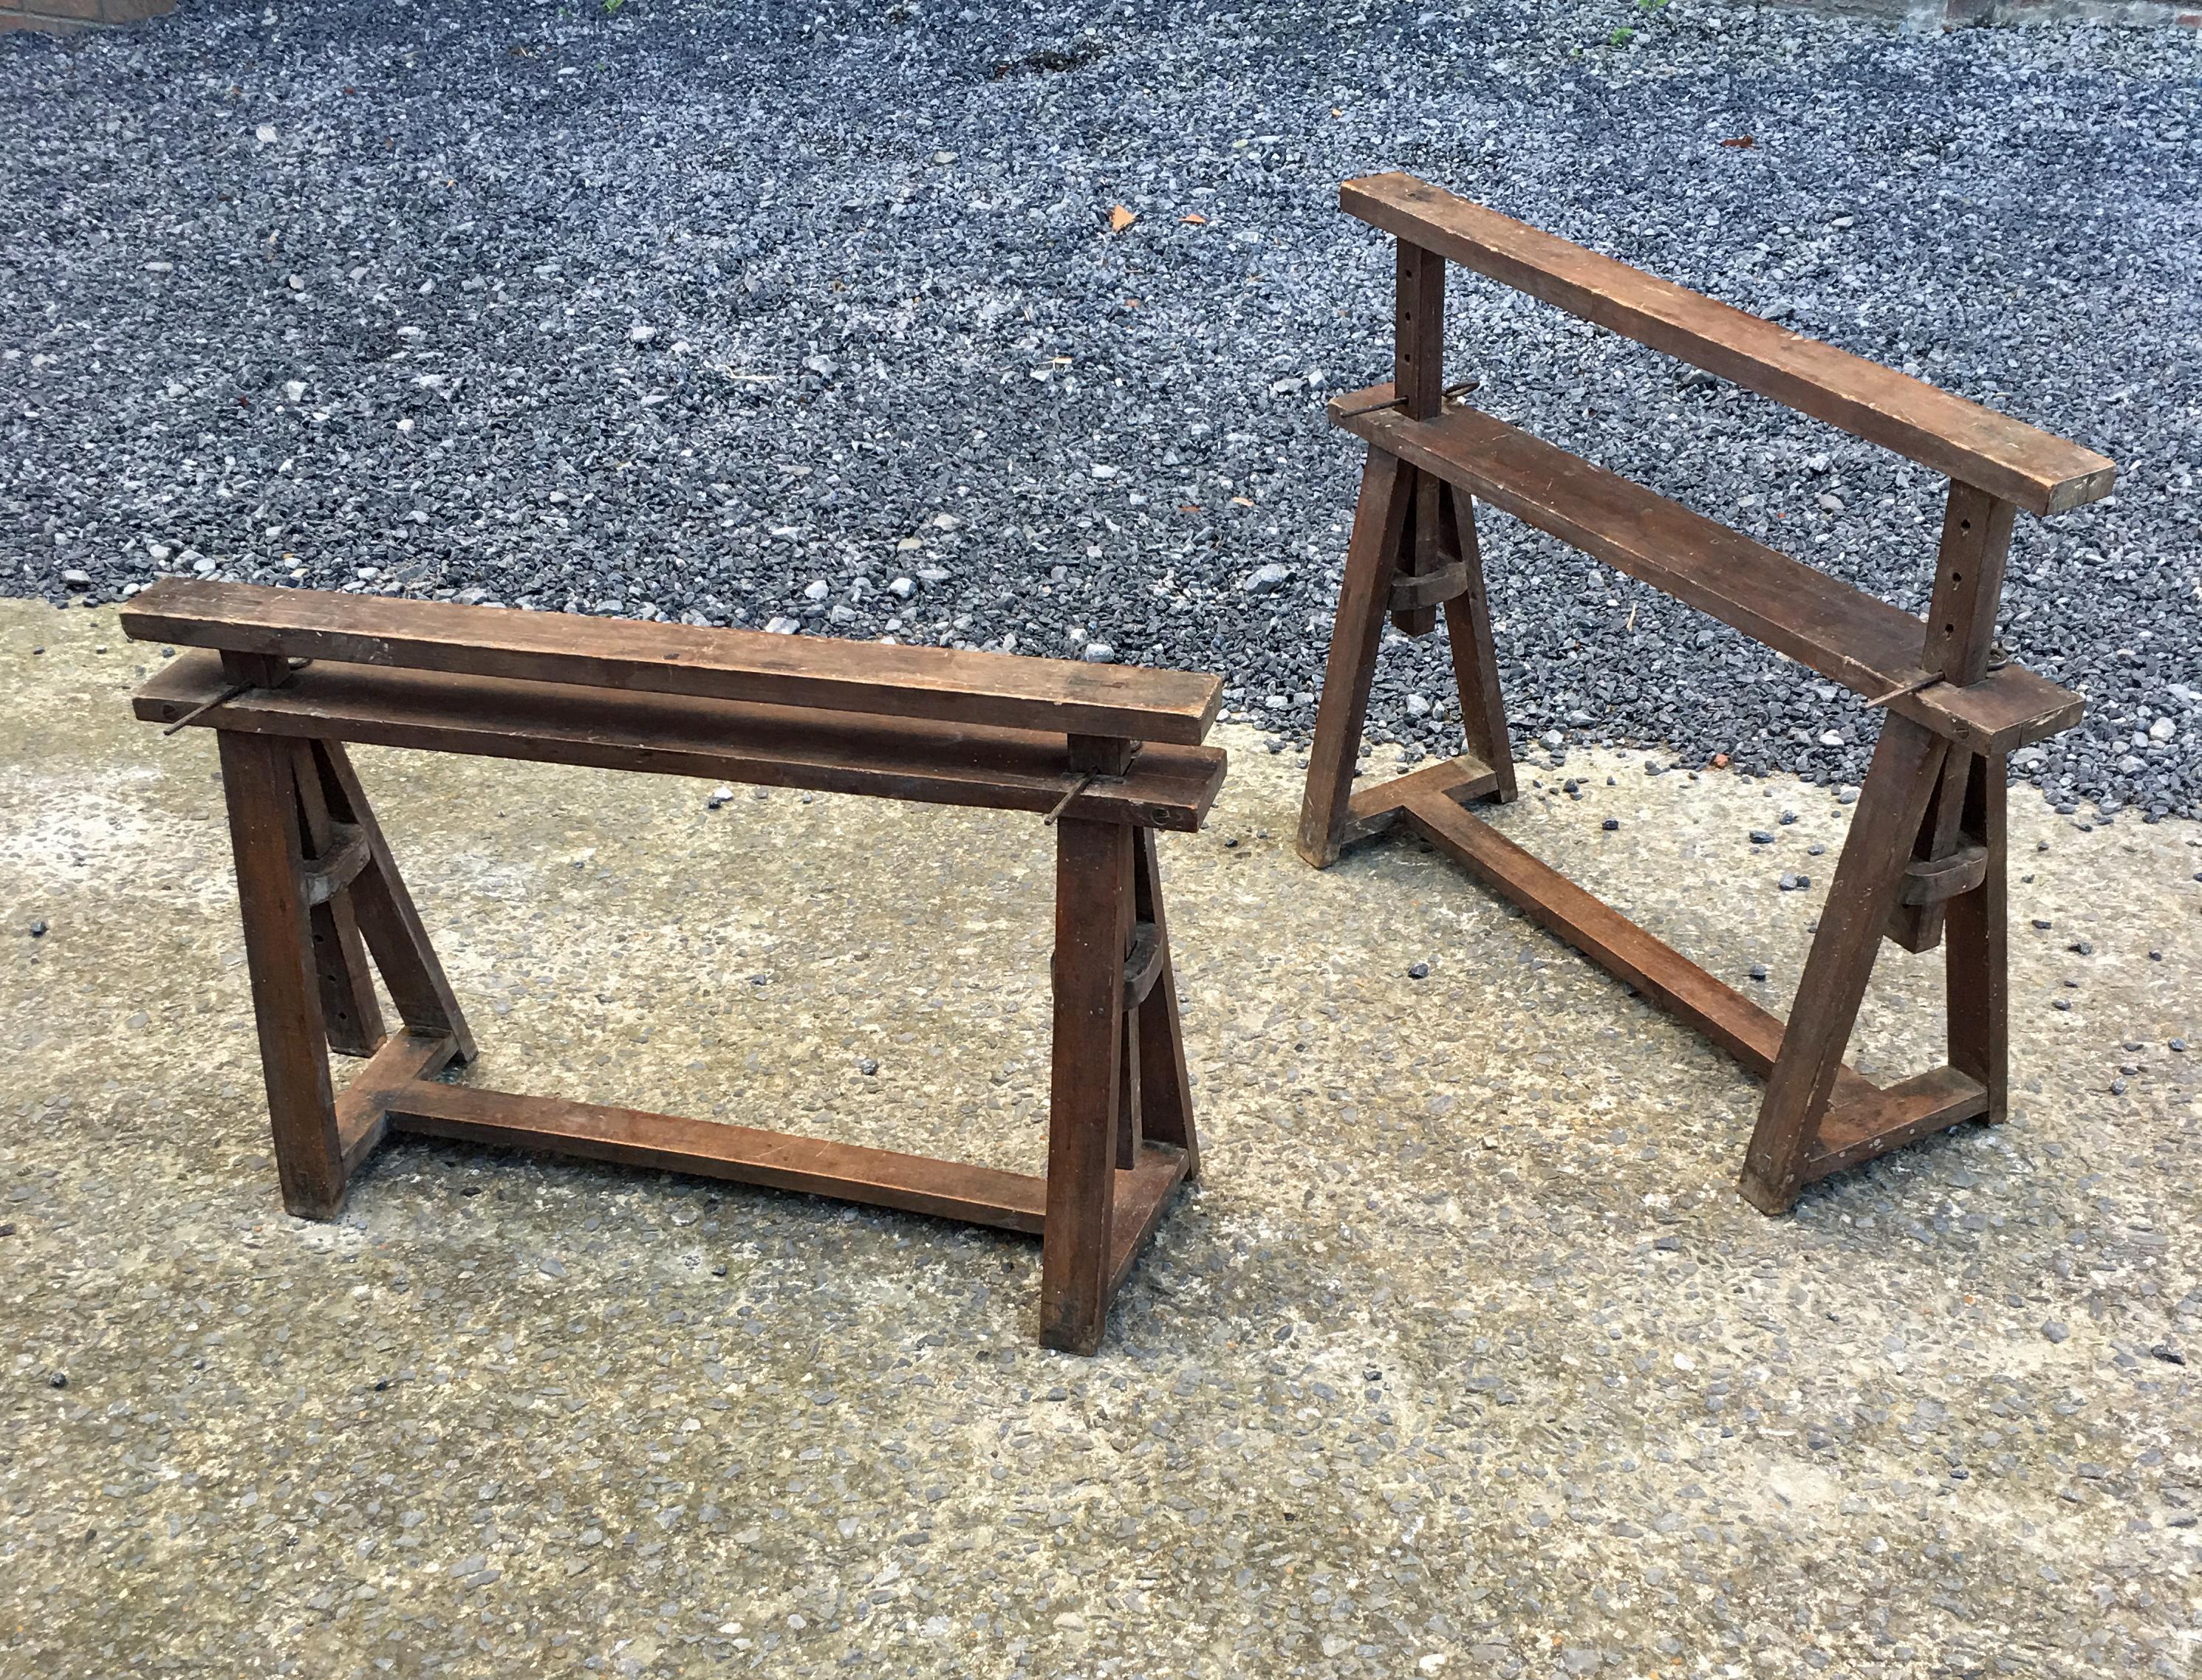 Height adjustable trestles, wood, circa 1930
measures: Height from 55 cm to 83 cm
Width 90 cm
Depth 27 cm.